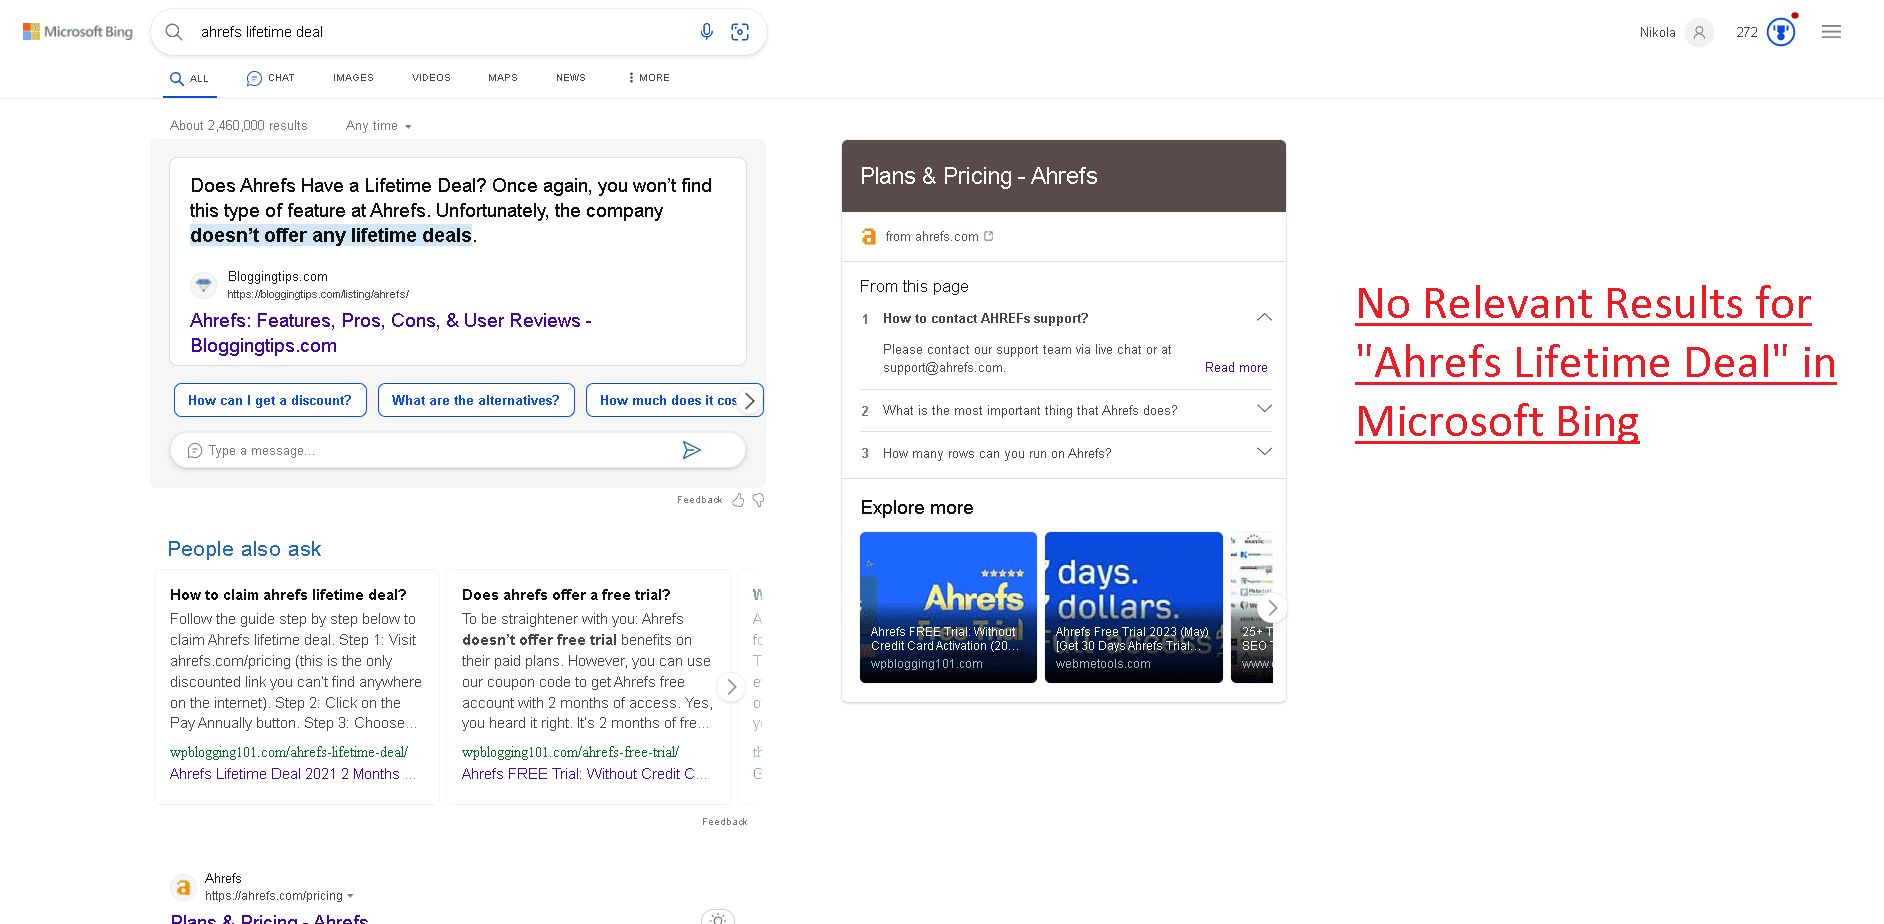 Microsoft Bing shows no results for "Ahrefs lifetime deal" query in Bing